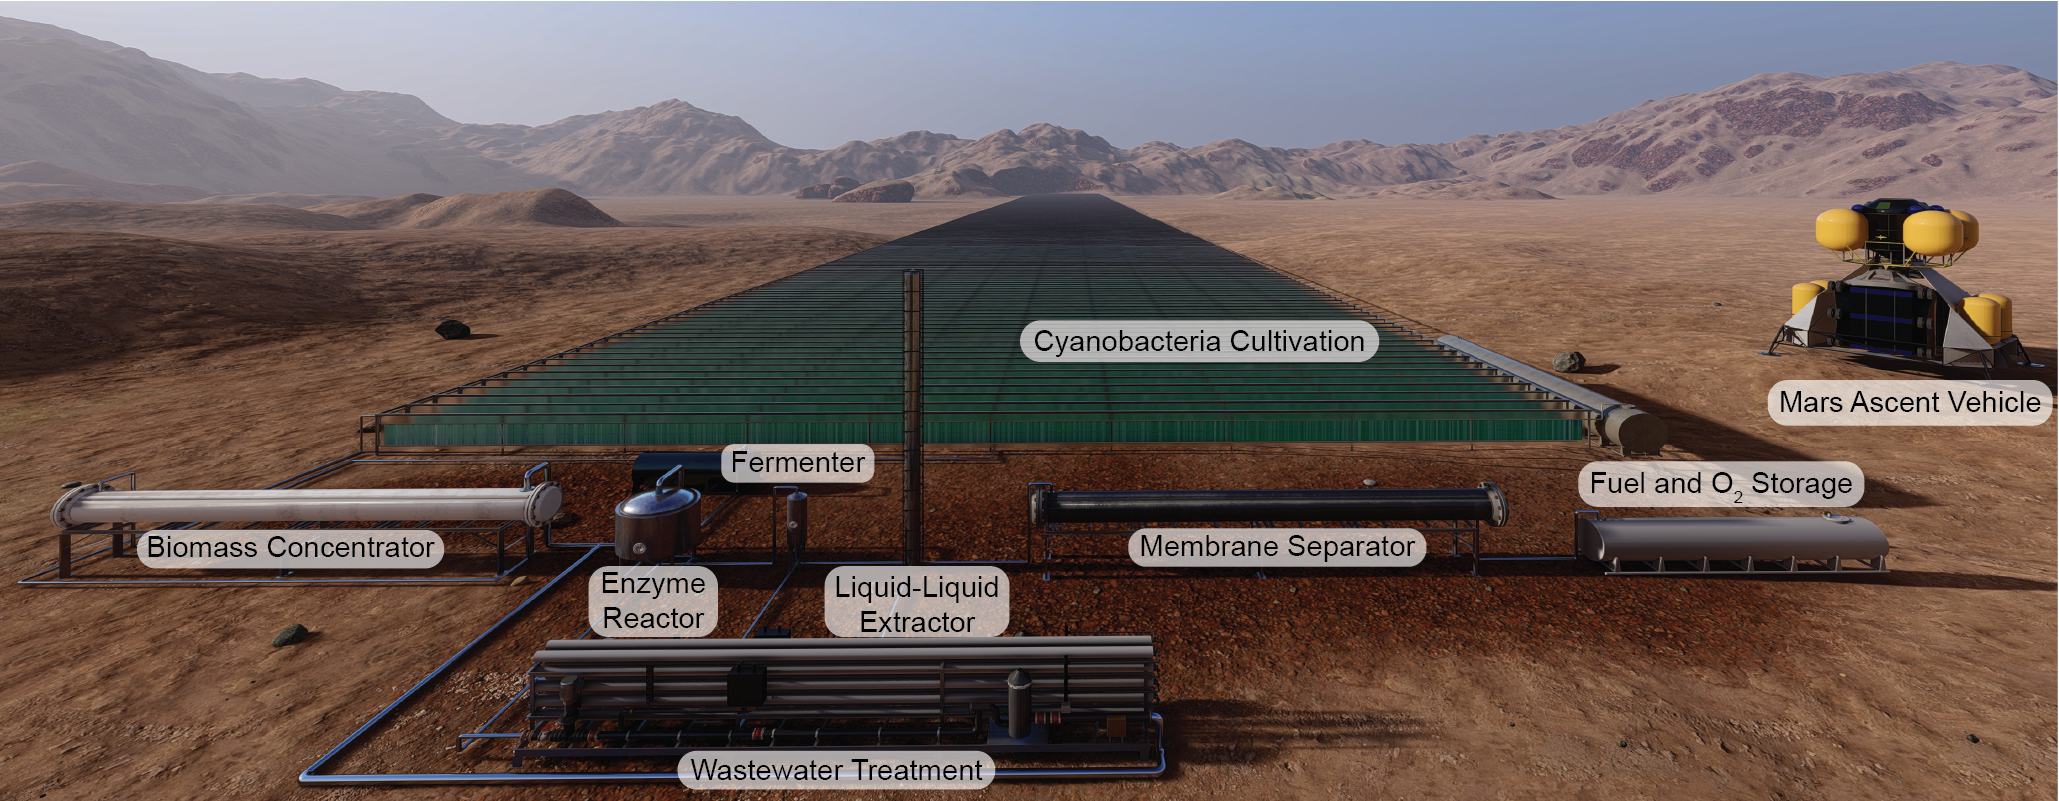 Photobioreactors the size of four football fields, covered with cyanobacteria, could produce rocket fuel on Mars. Courtesy: BOKO mobile study